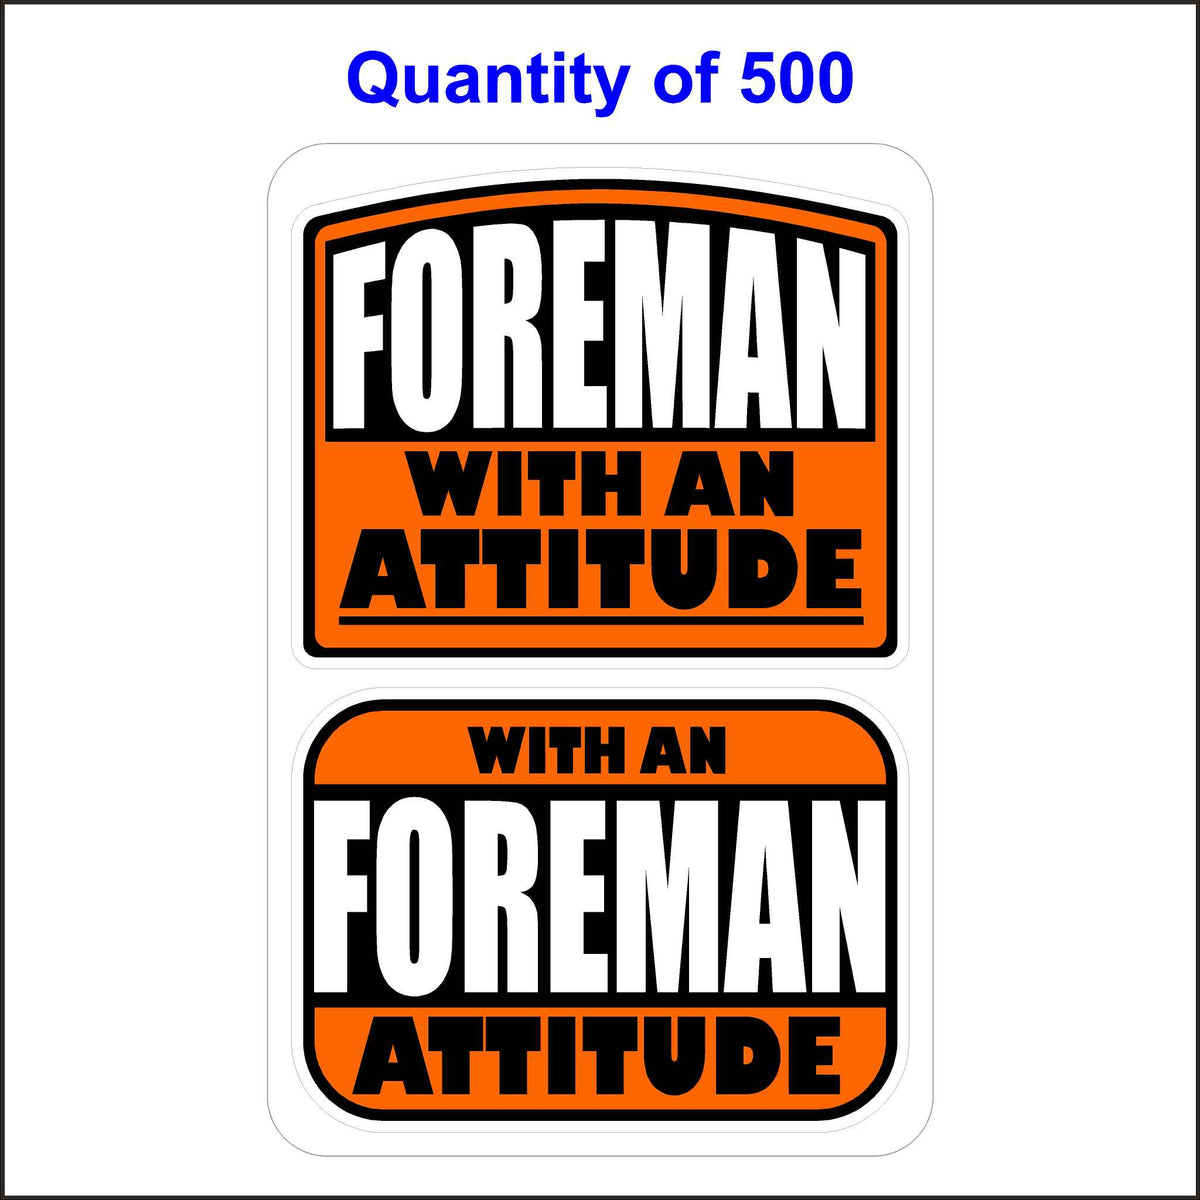 Foreman with an Attitude Stickers 500 Quantity.